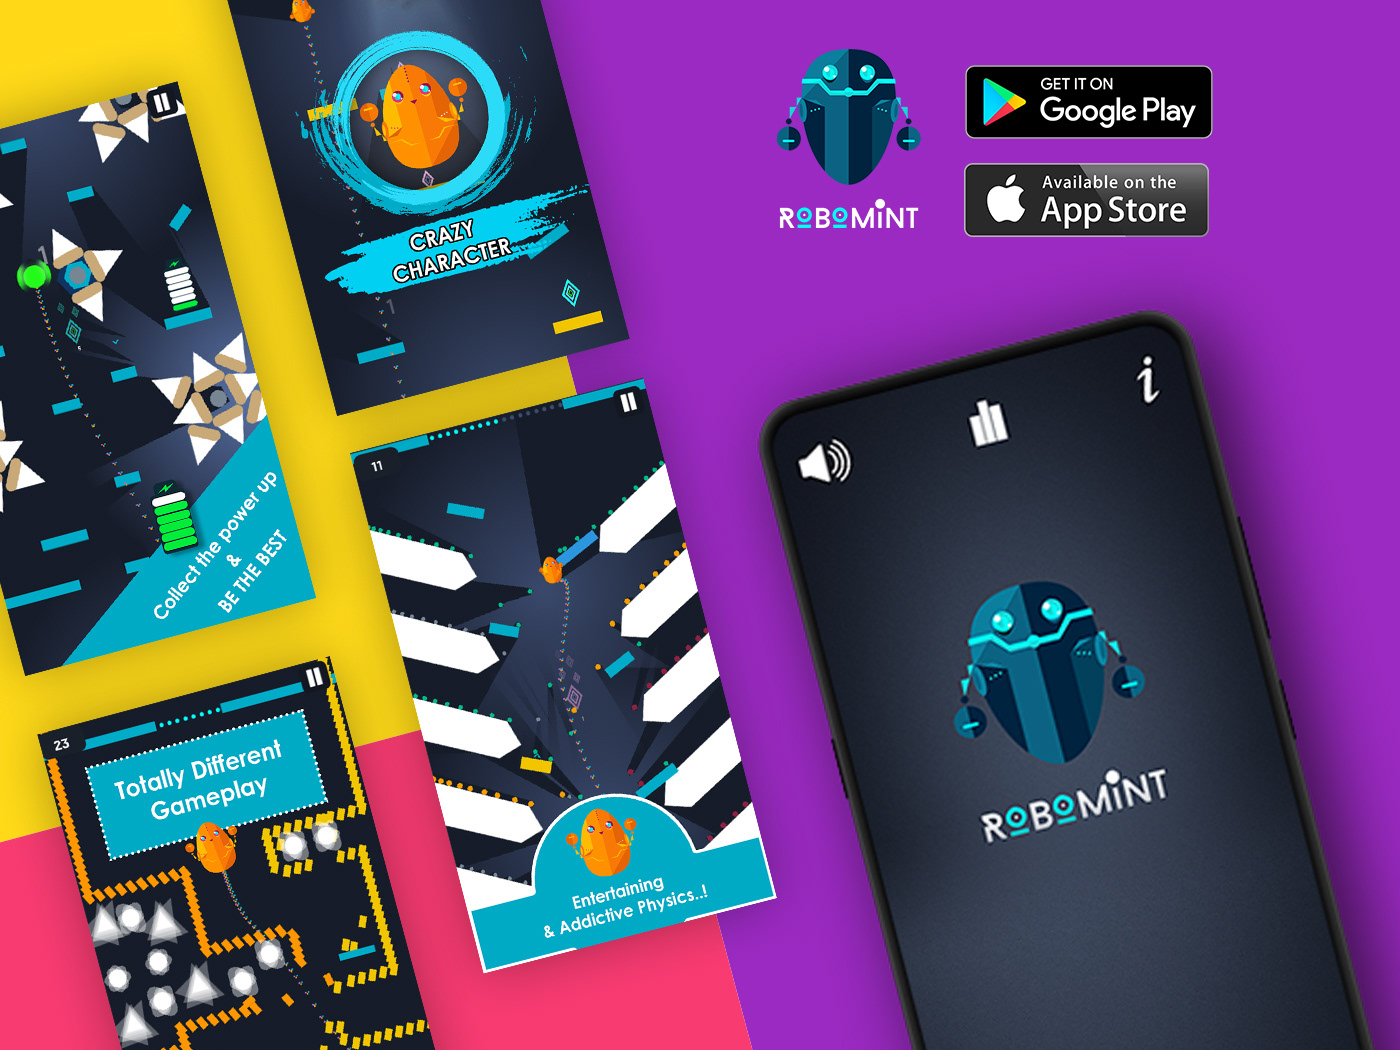 app game robomint capermint ios android UI ux design